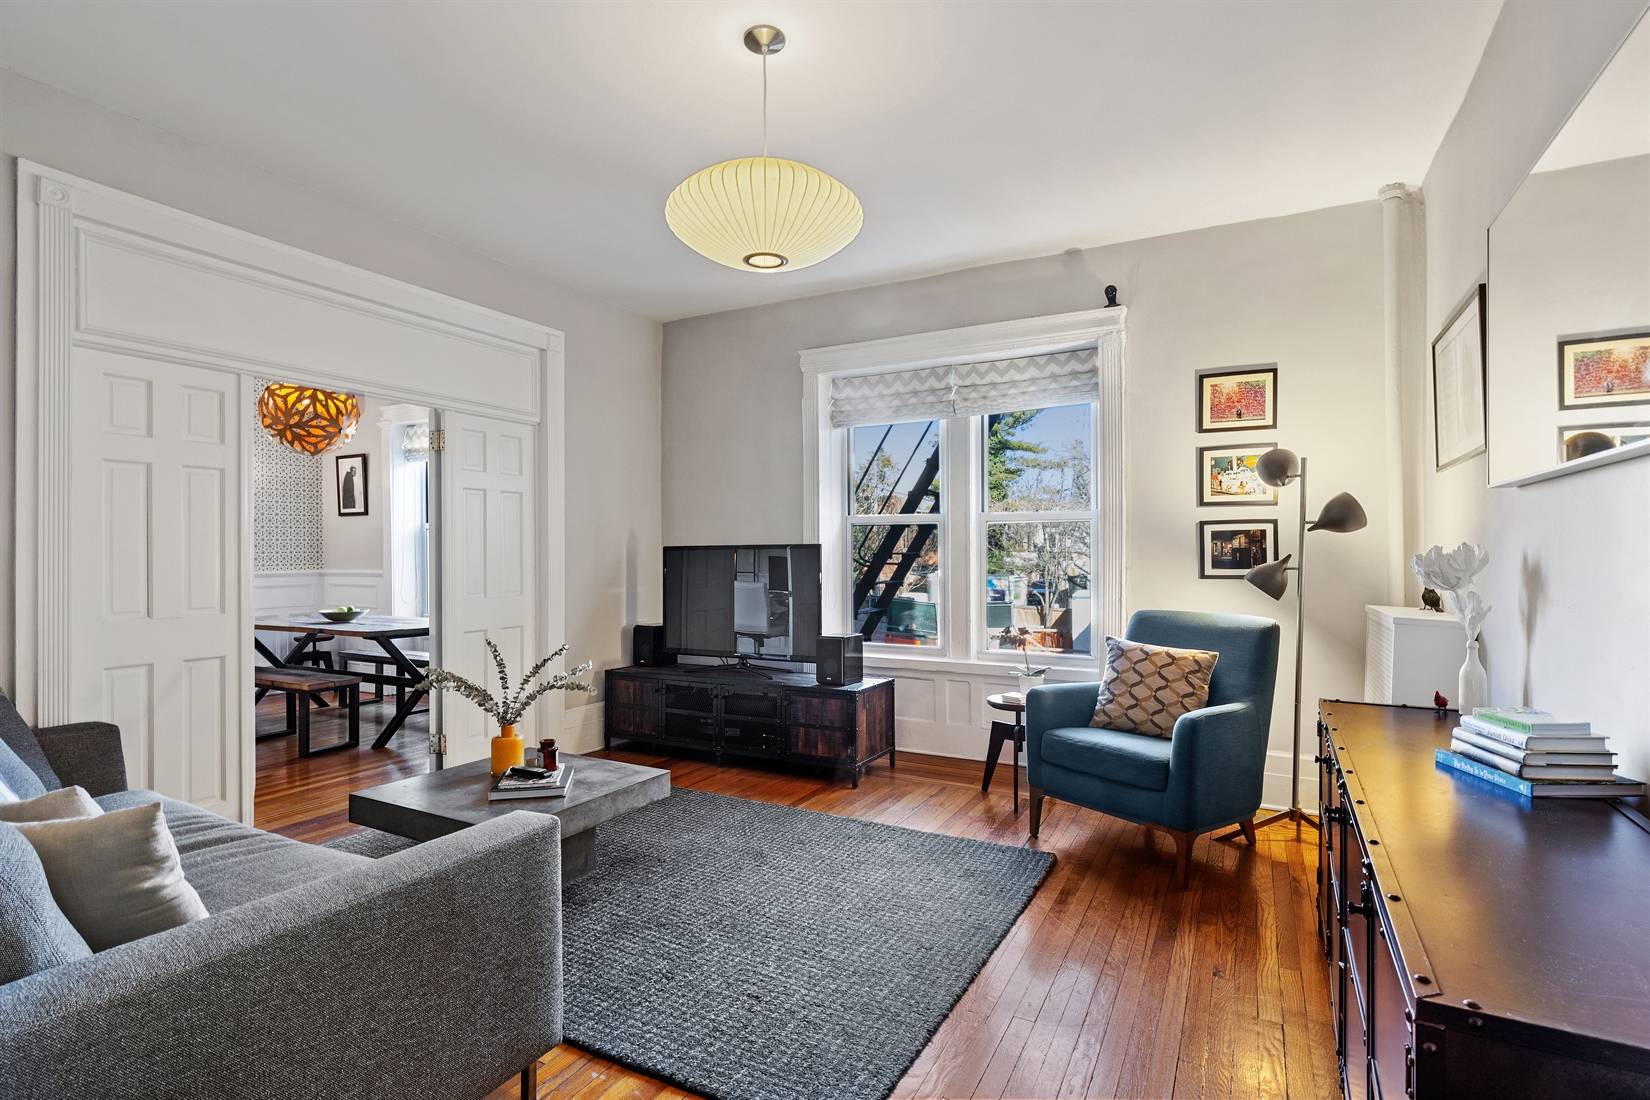 Pre war detail, a renovated kitchen and bath, outdoor space, and a FORMAL DINING ROOM A this sprawling prewar coop apartment is truly special.